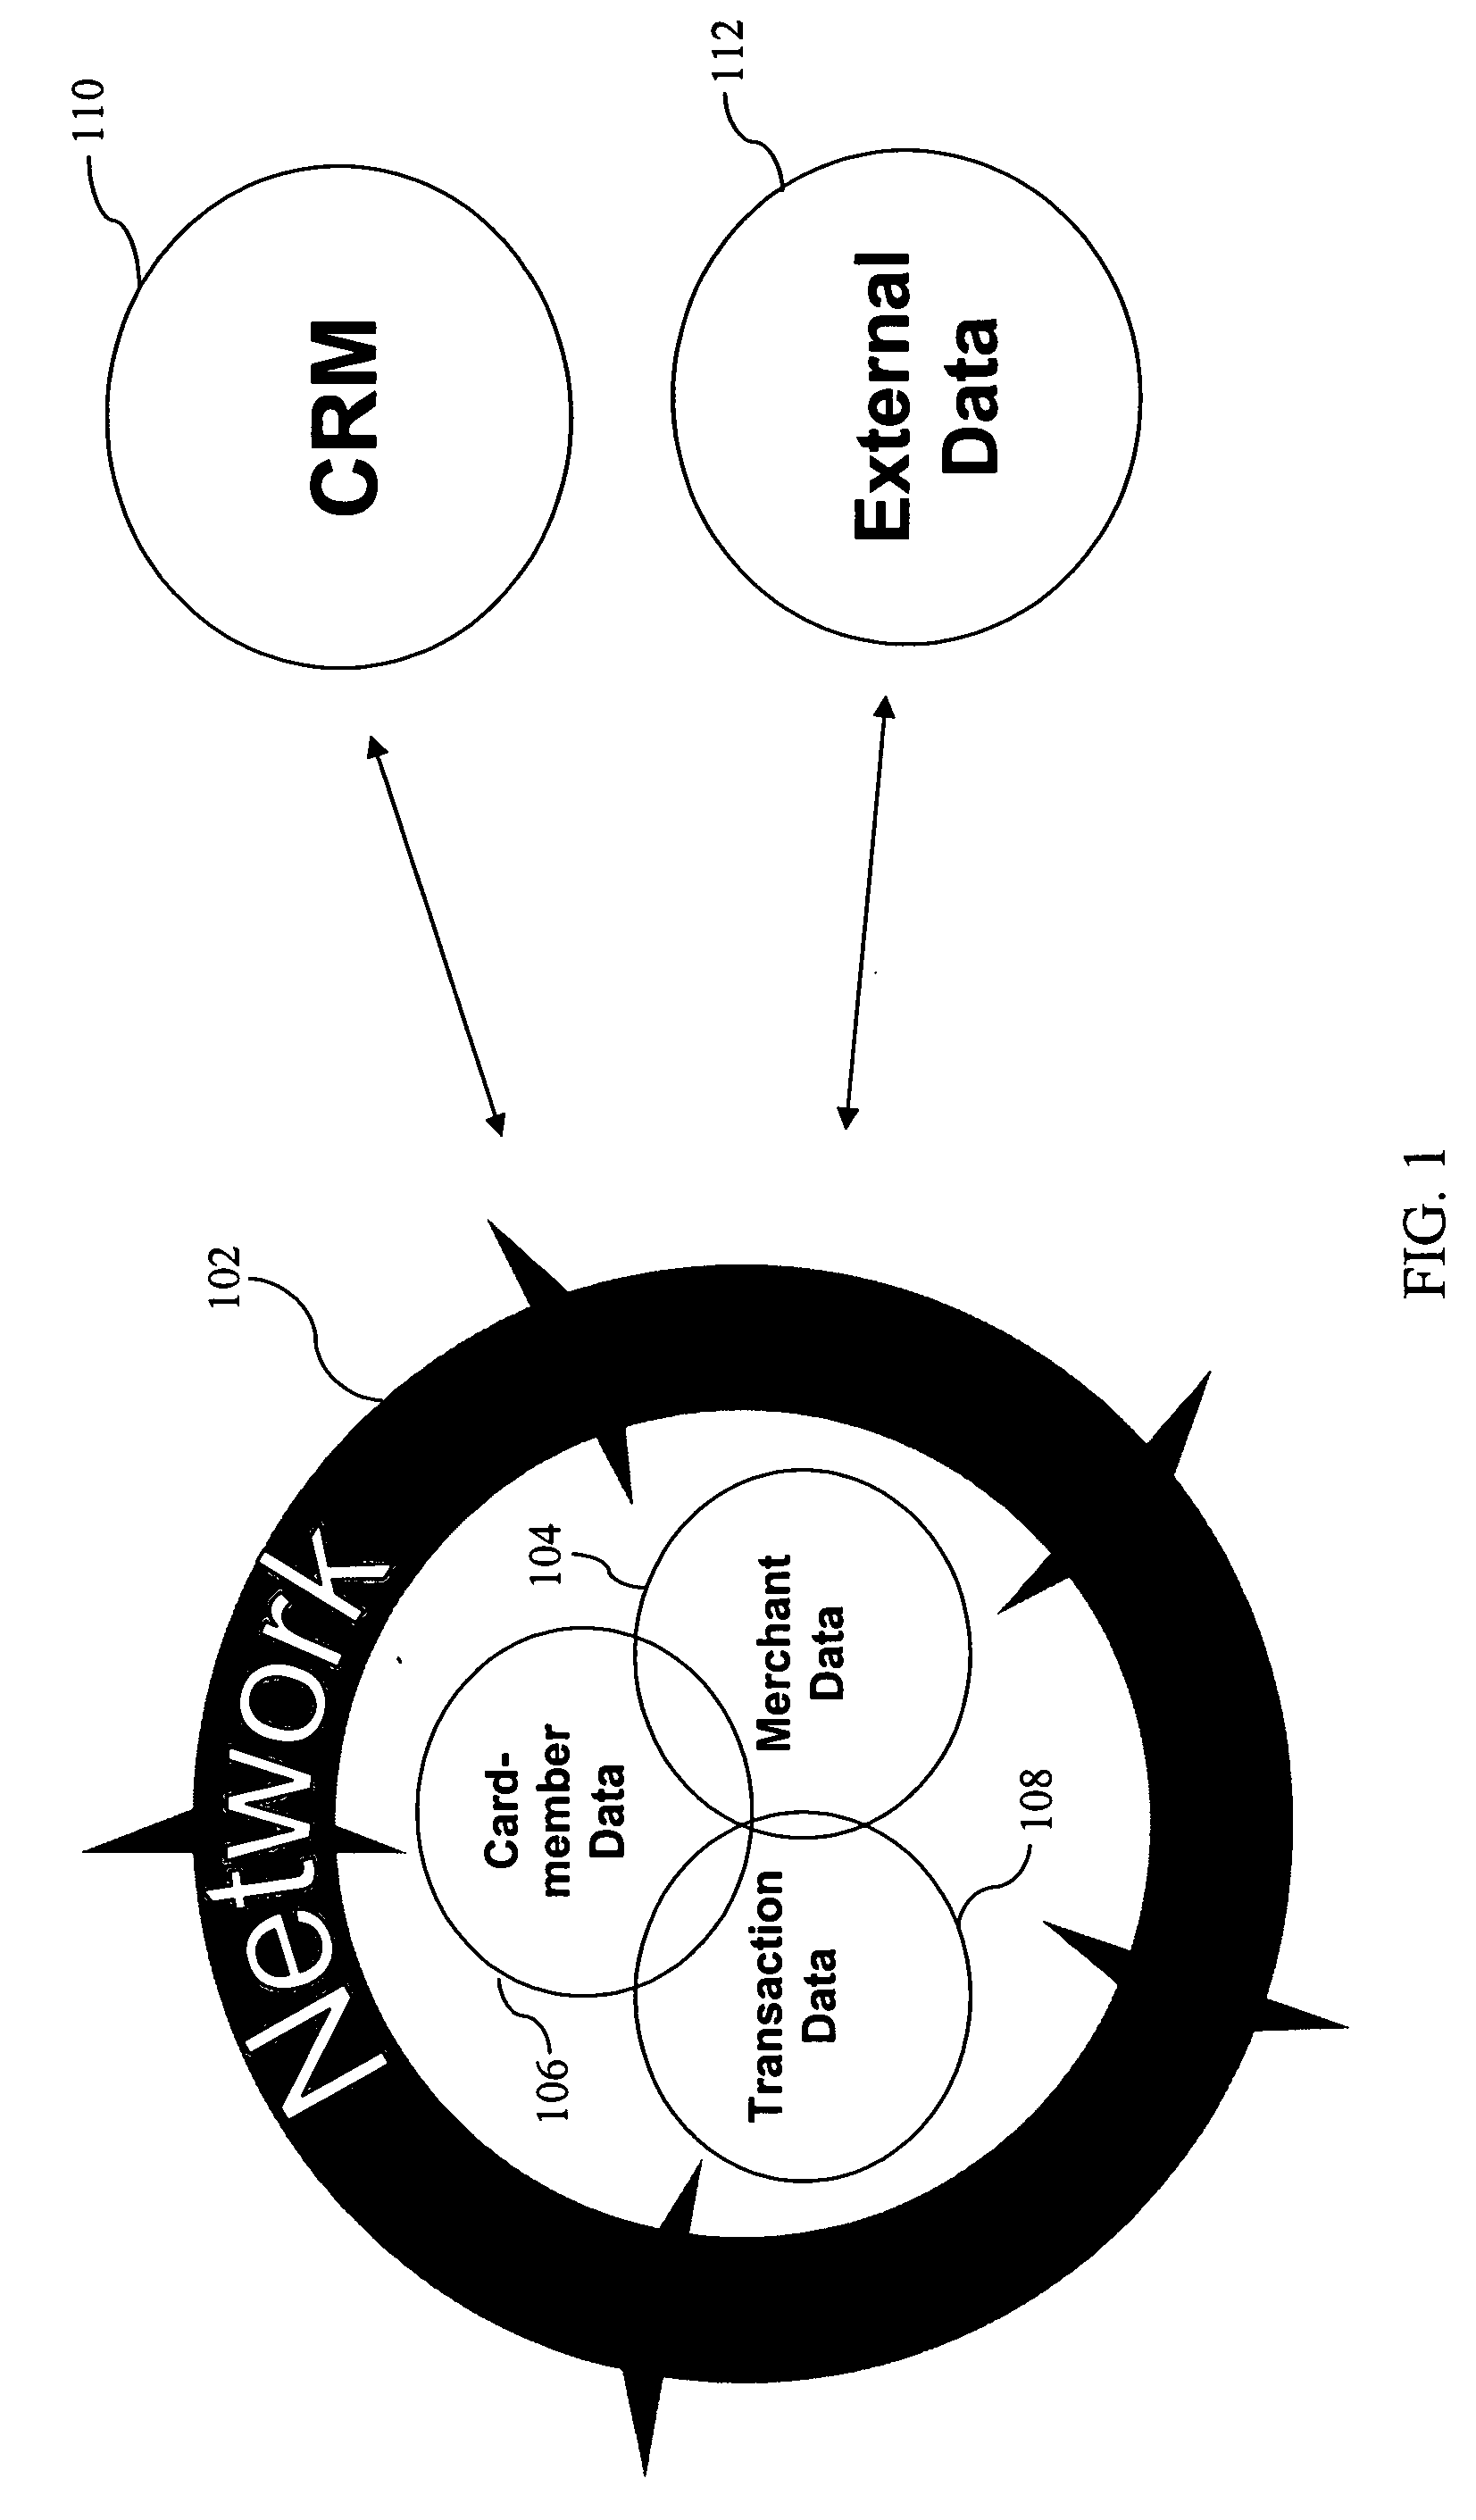 System, method, and computer program product for increasing inventory turnover using targeted consumer offers